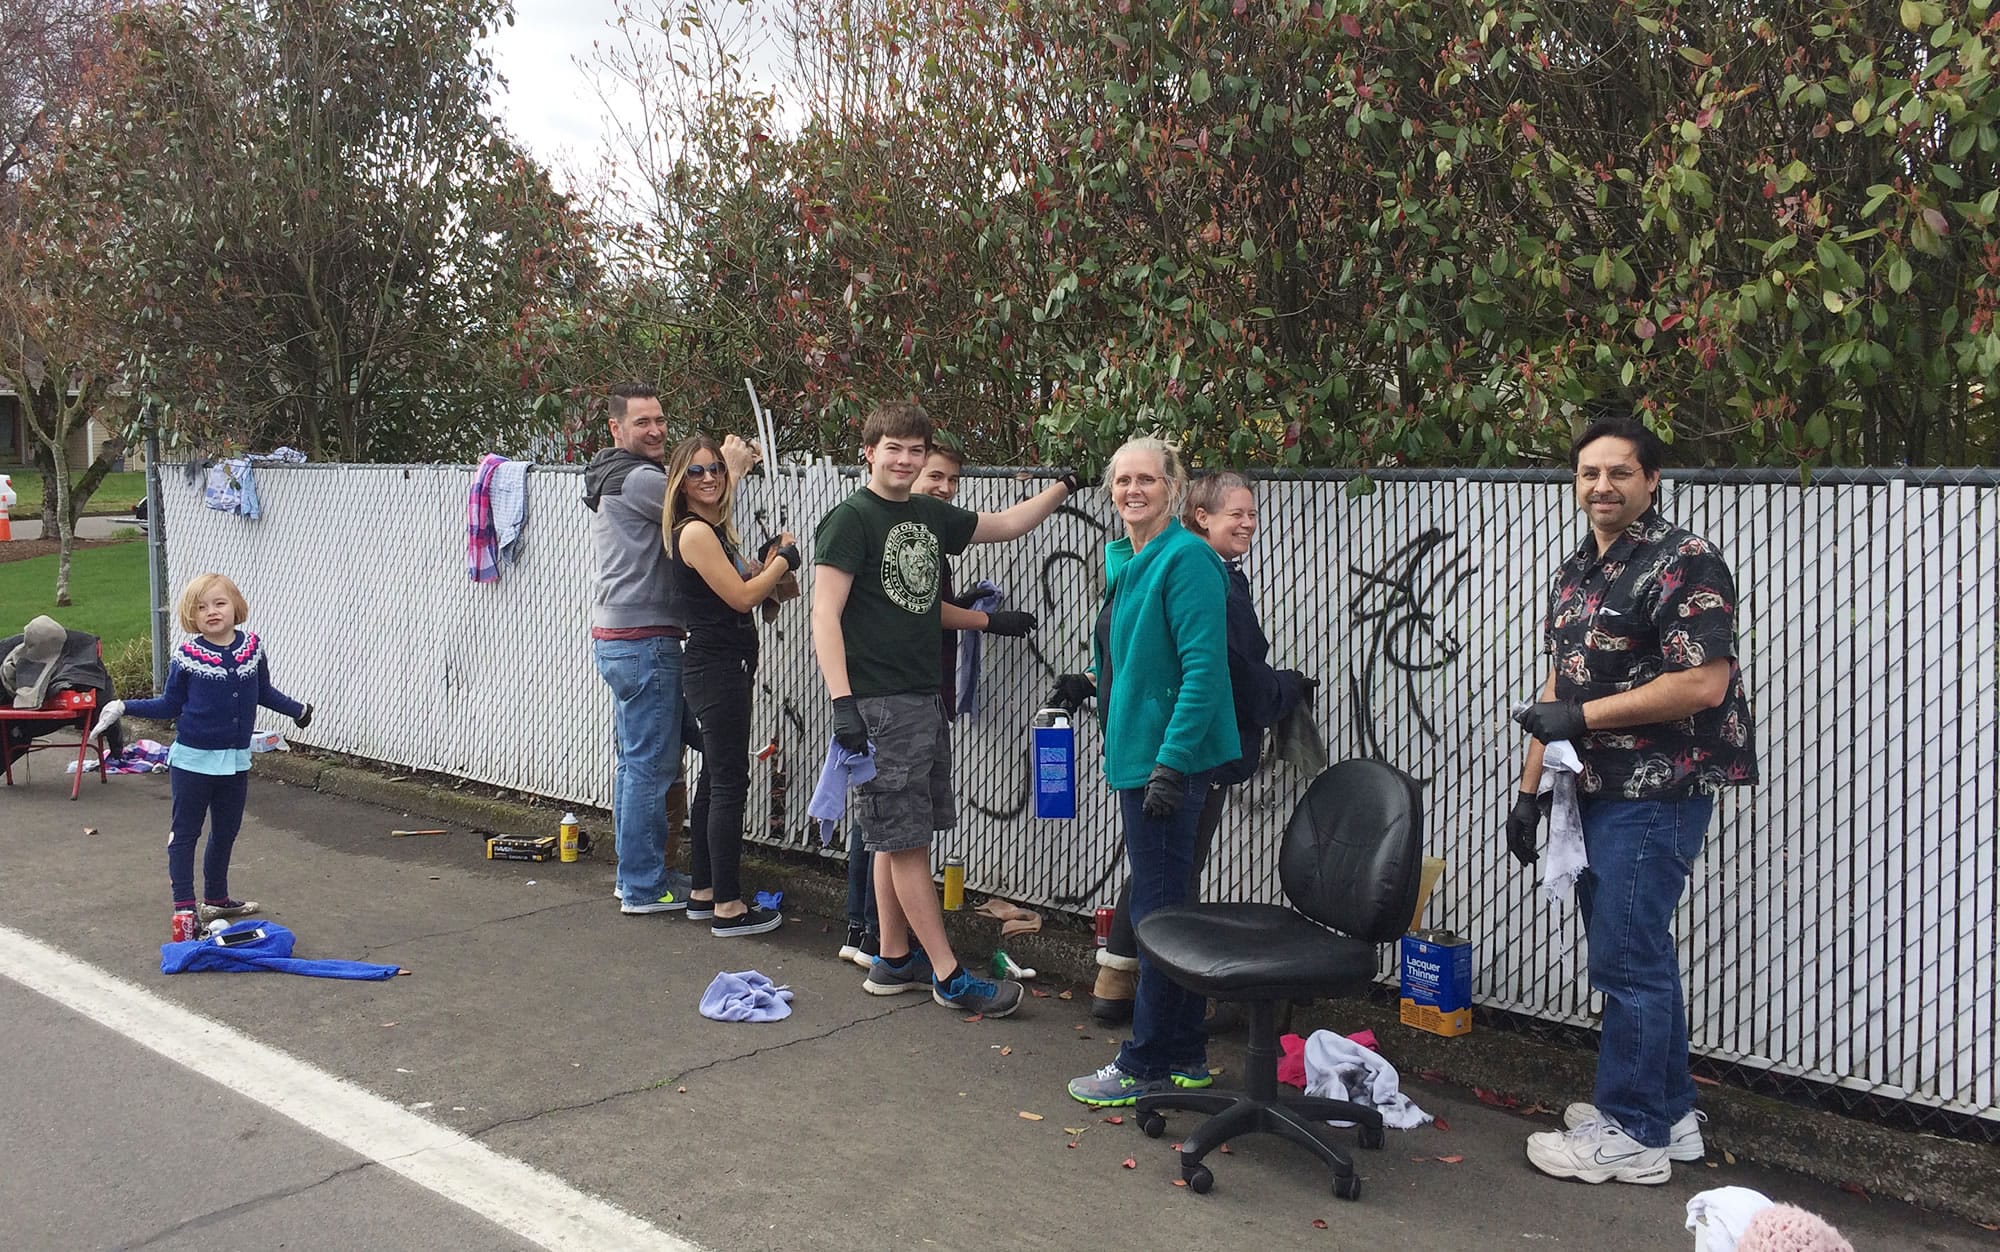 When Lee and Jane Knable worked to remove graffiti from their fence, they were joined by a steady stream of people who stopped to help. The couple was wowed because they didn't know any of the do-gooders and they took time out of their day to help on a rare sunny Saturday.